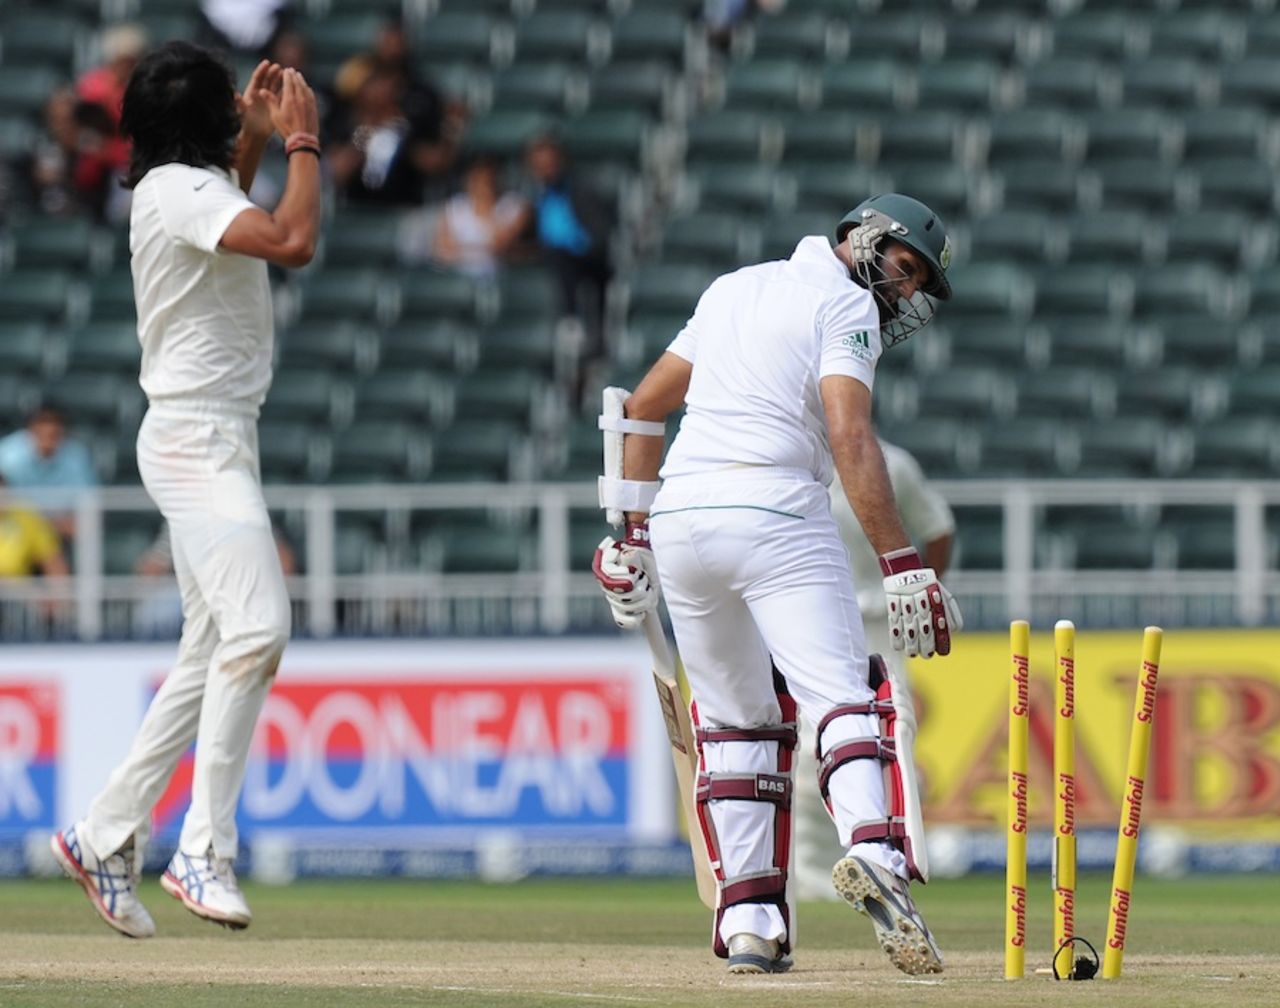 Hashim Amla is bowled by Ishant Sharma, South Africa v India, 1st Test, Johannesburg, 2nd day, December 19, 2013